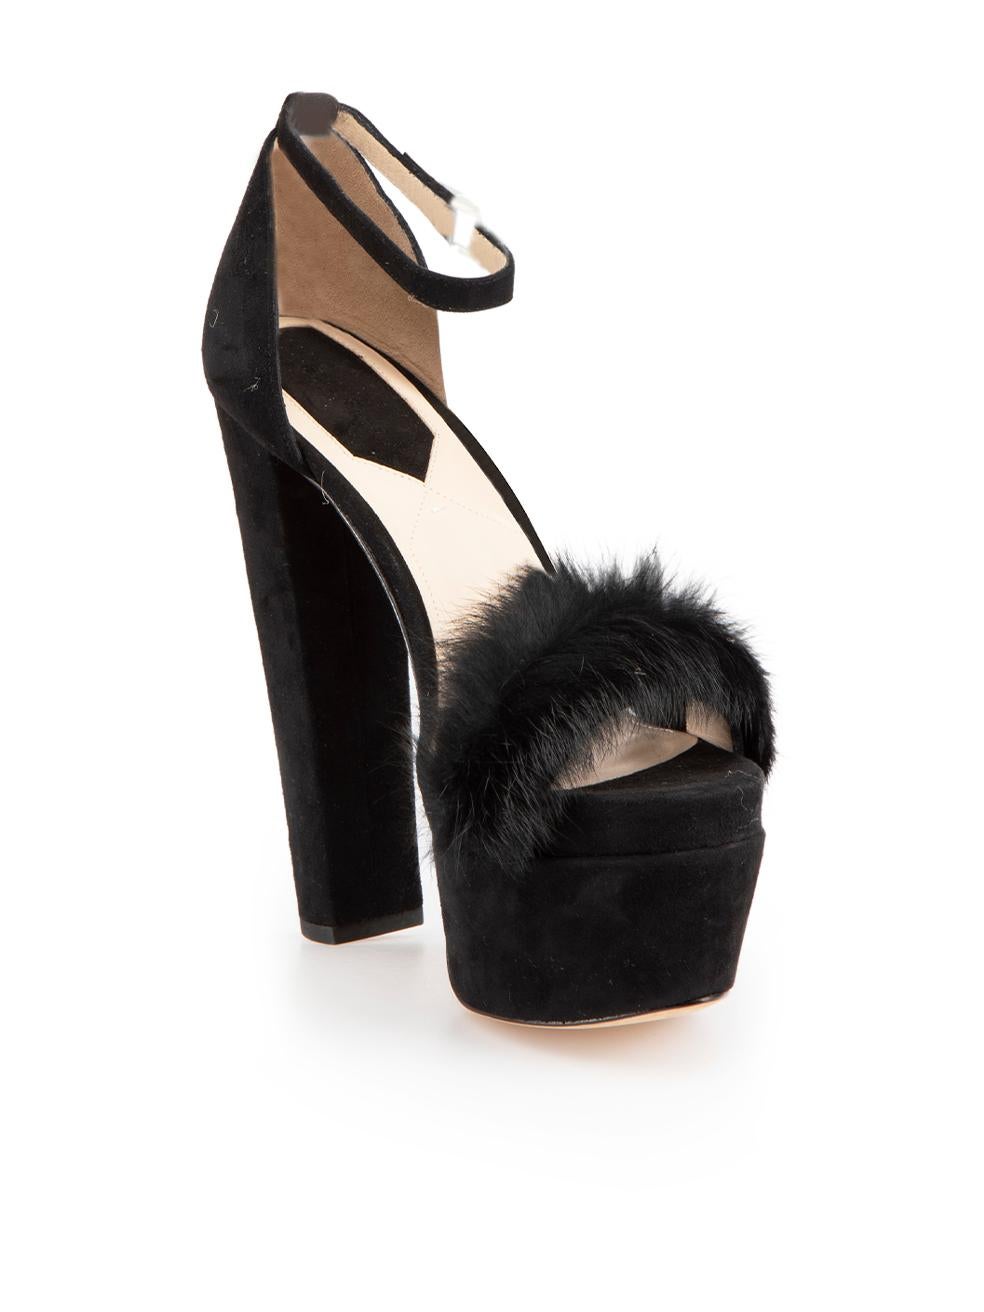 CONDITION is Never worn. No visible wear to shoes is evident on this new Elie Saab designer resale item. These shoes come with original box and dust bag.
 
 Details
 Black
 Suede
 Heeled sandals
 Rabbit fur trim
 Peep toe
 Platform
 Adjustable ankle